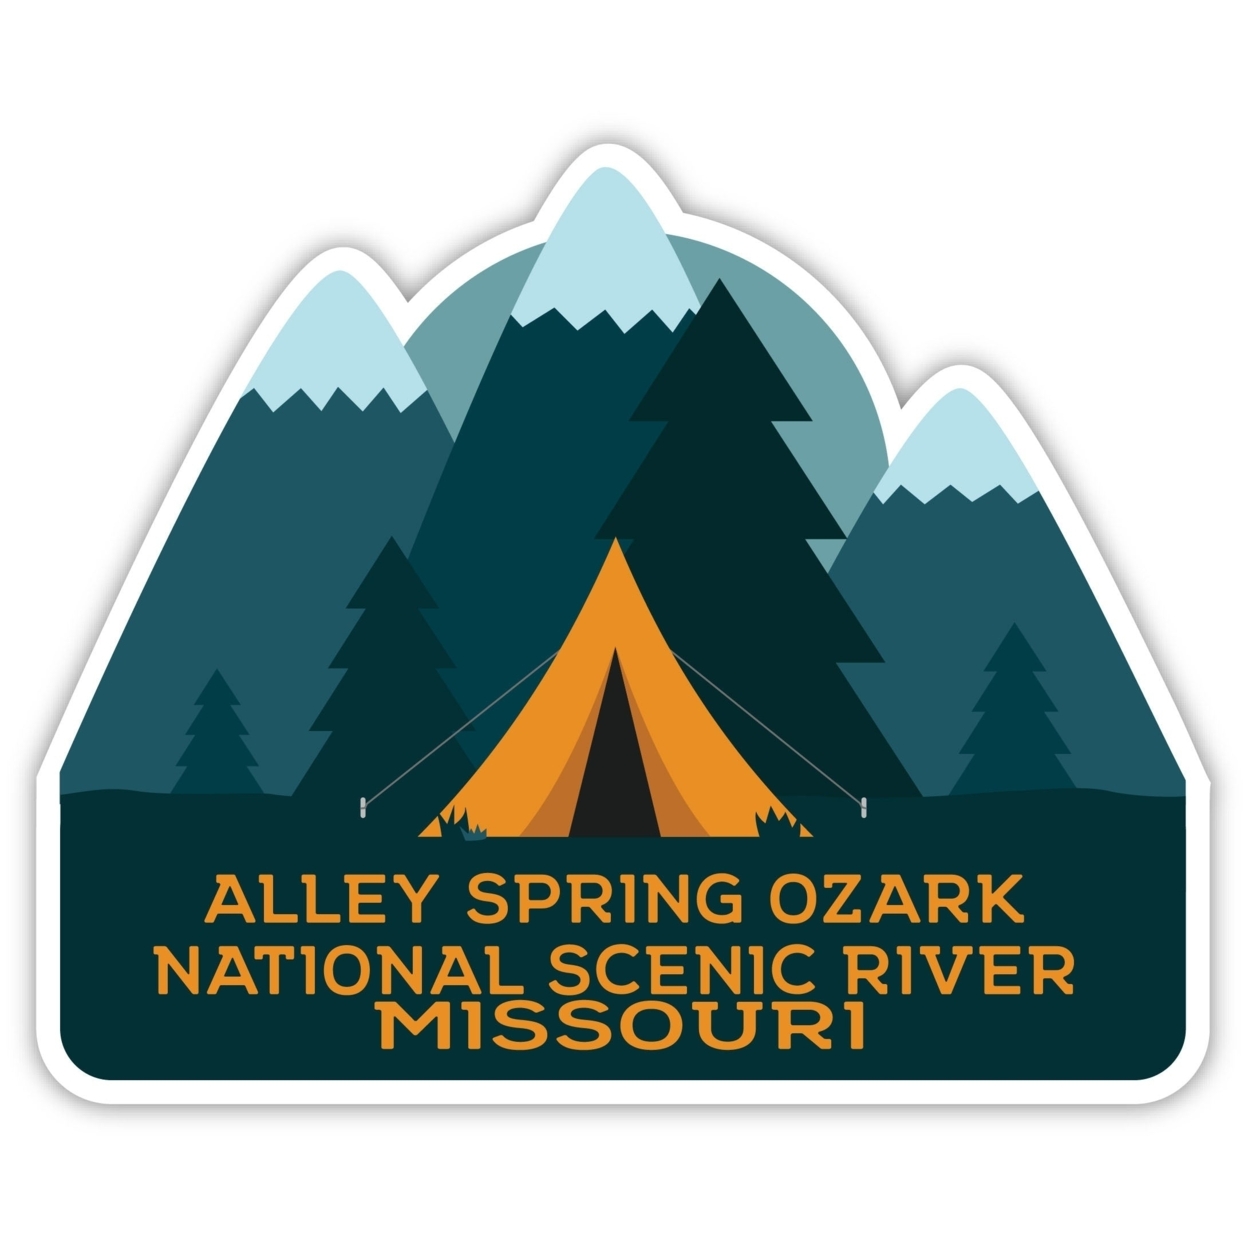 Alley Spring Ozark National Scenic River Missouri Souvenir Decorative Stickers (Choose Theme And Size) - 4-Pack, 12-Inch, Tent